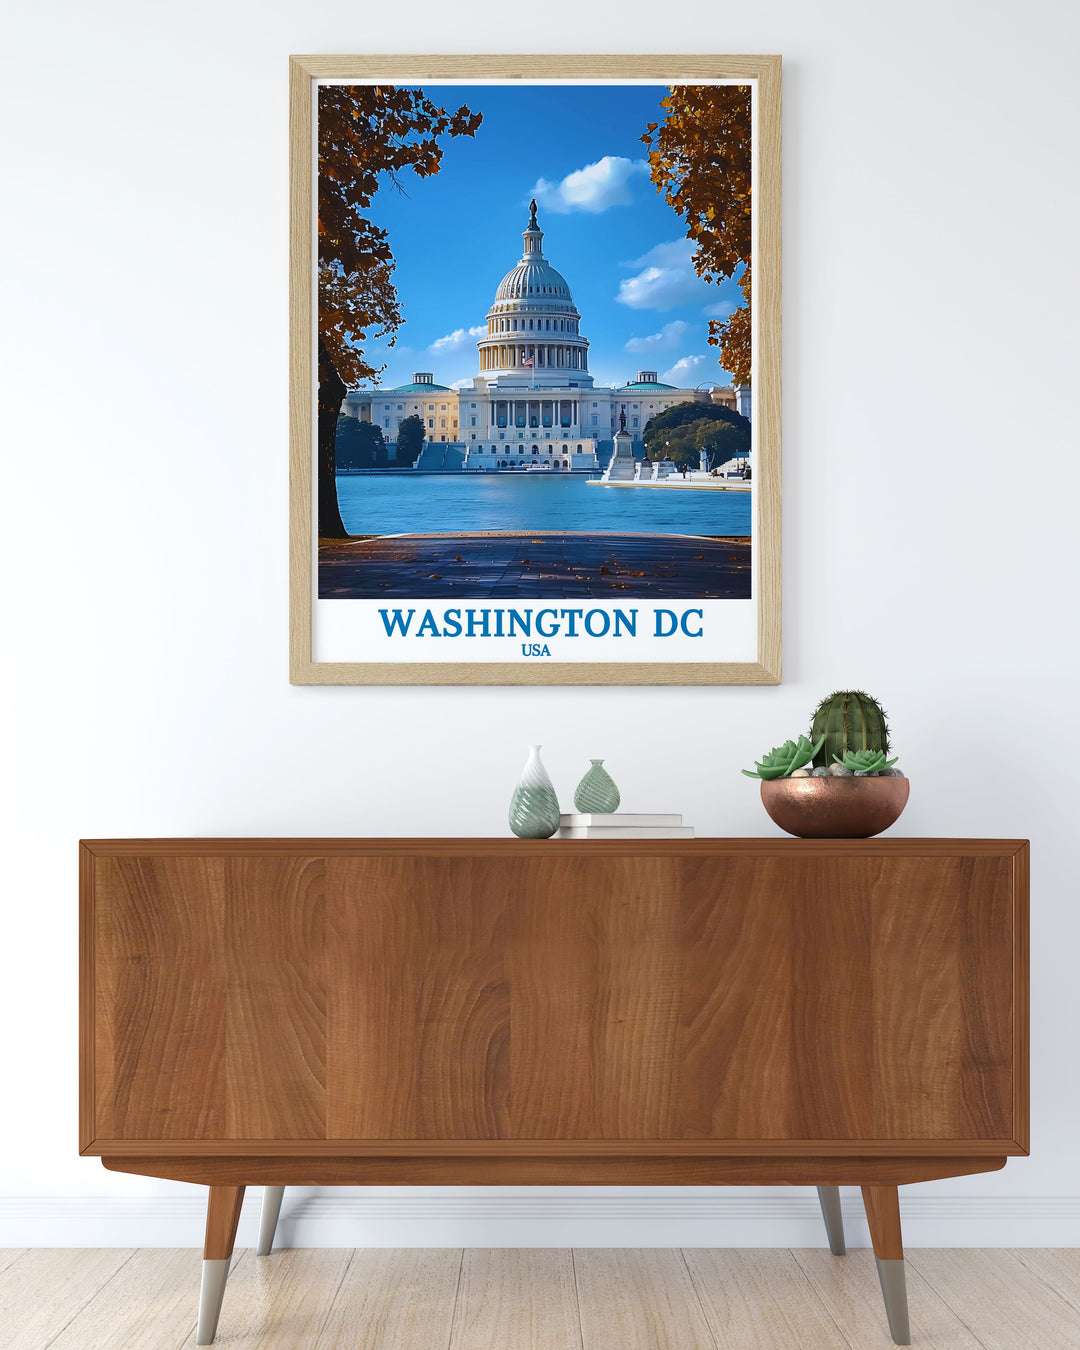 Elegant Washington DC art print showcasing The United States Capitol Building ideal for adding a touch of sophistication to your living room or office space